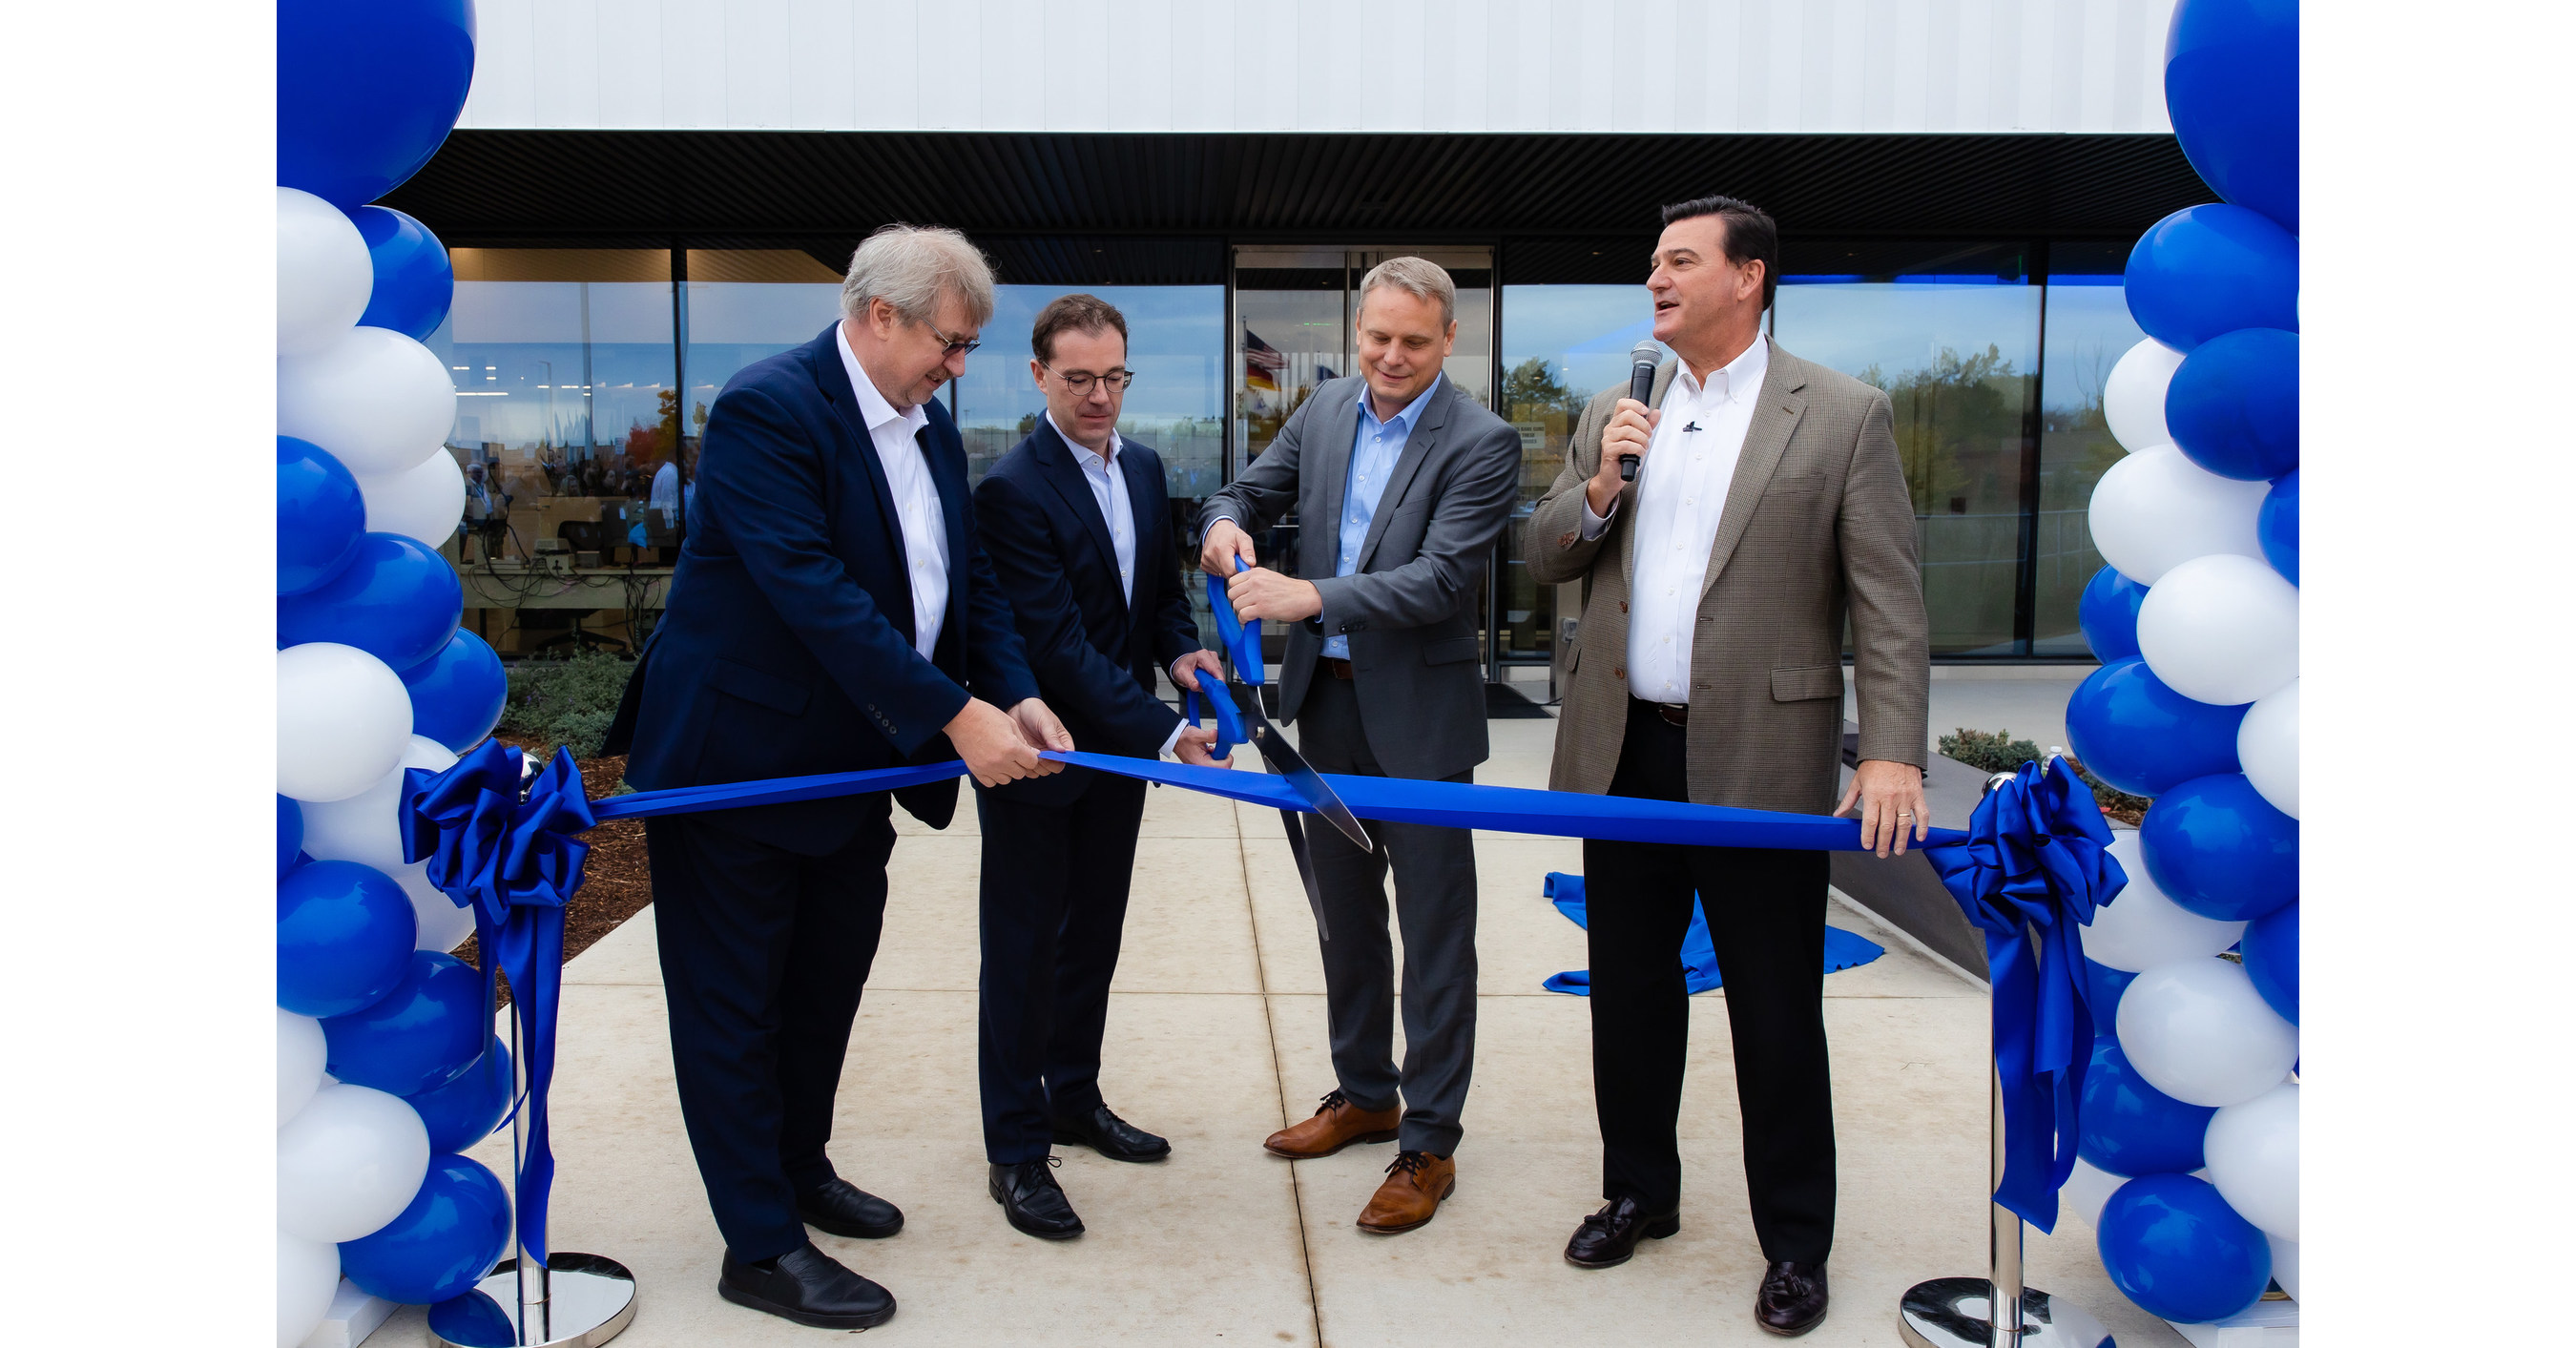 ZEISS celebrates grand opening of Quality Excellence Center in Wixom, Michigan